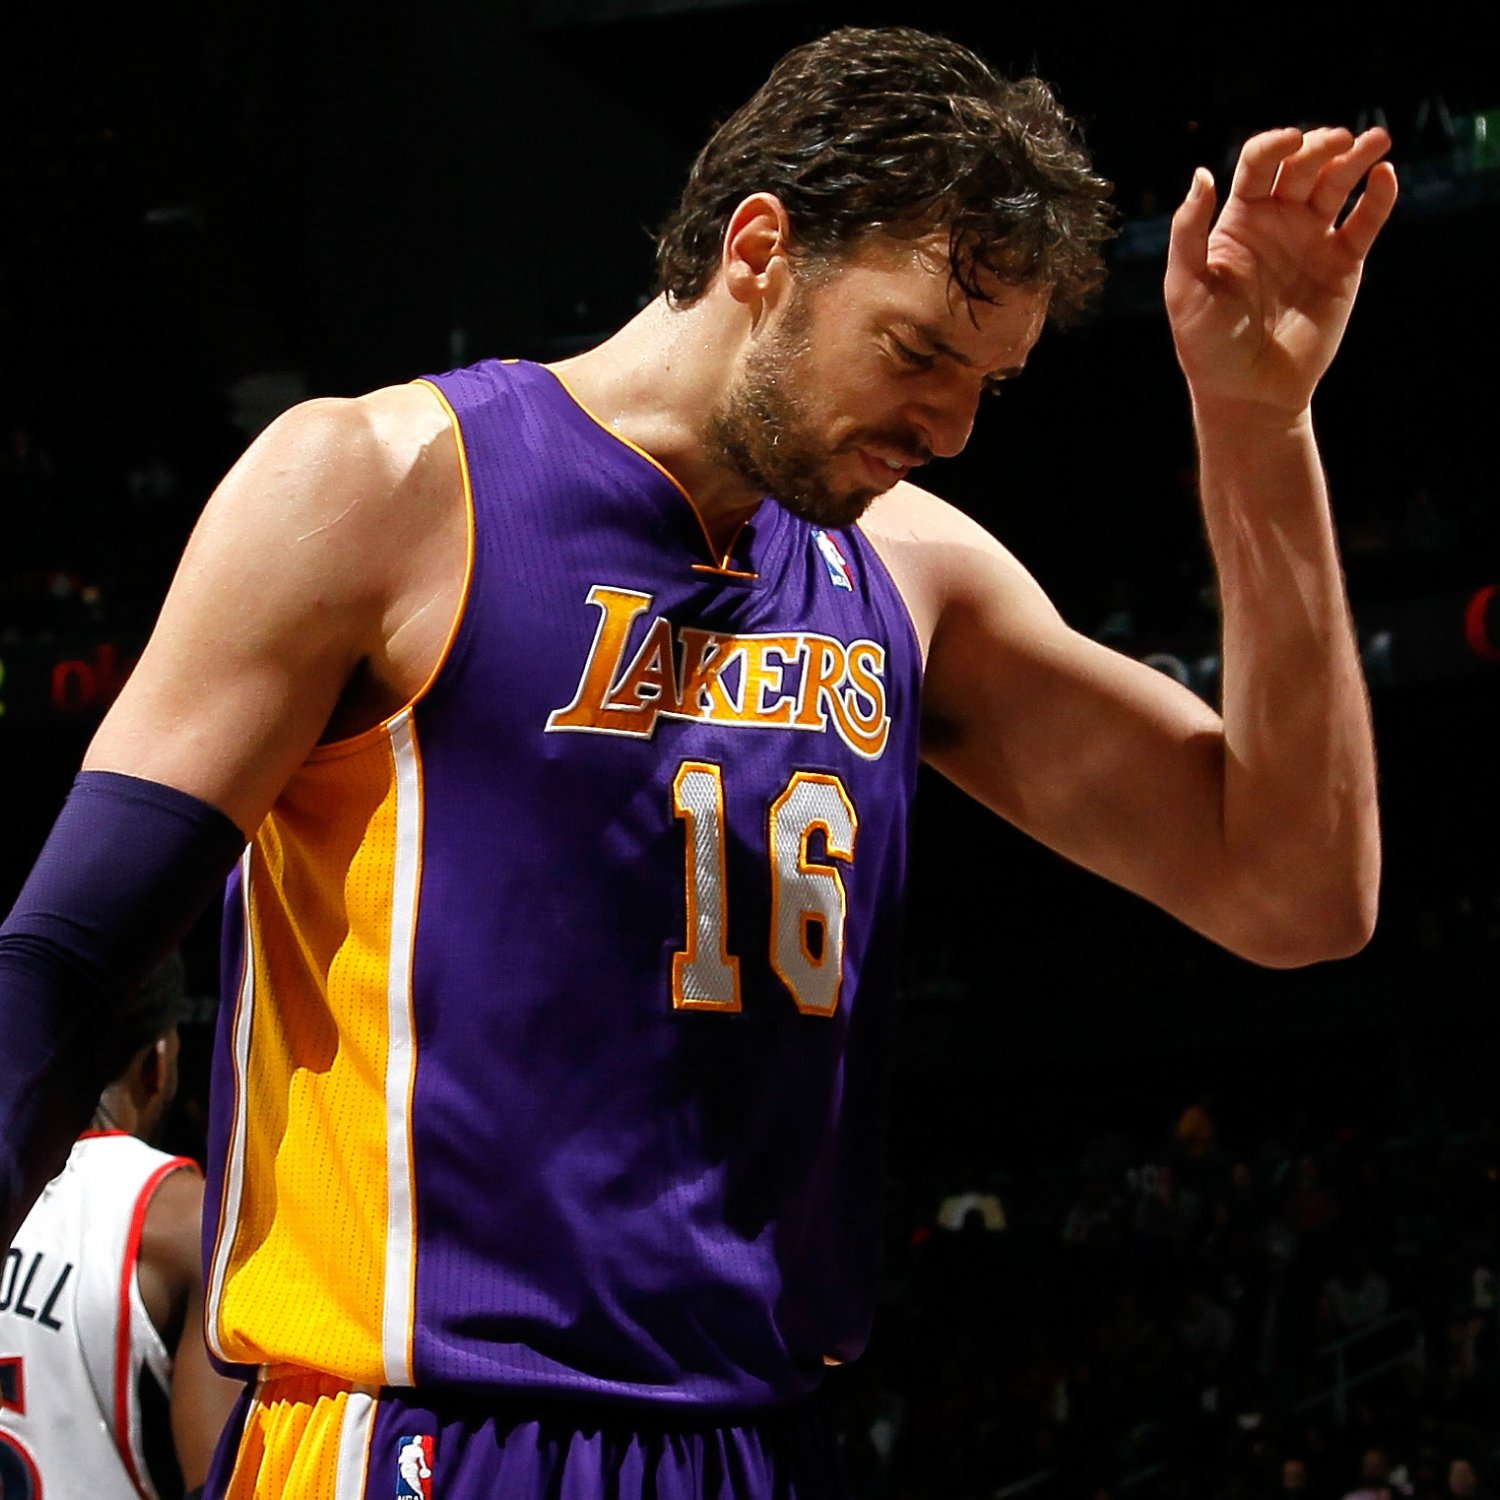 Lakers Trade Rumors: Latest Updates on Pau Gasol's Future with the Team | Bleacher Report